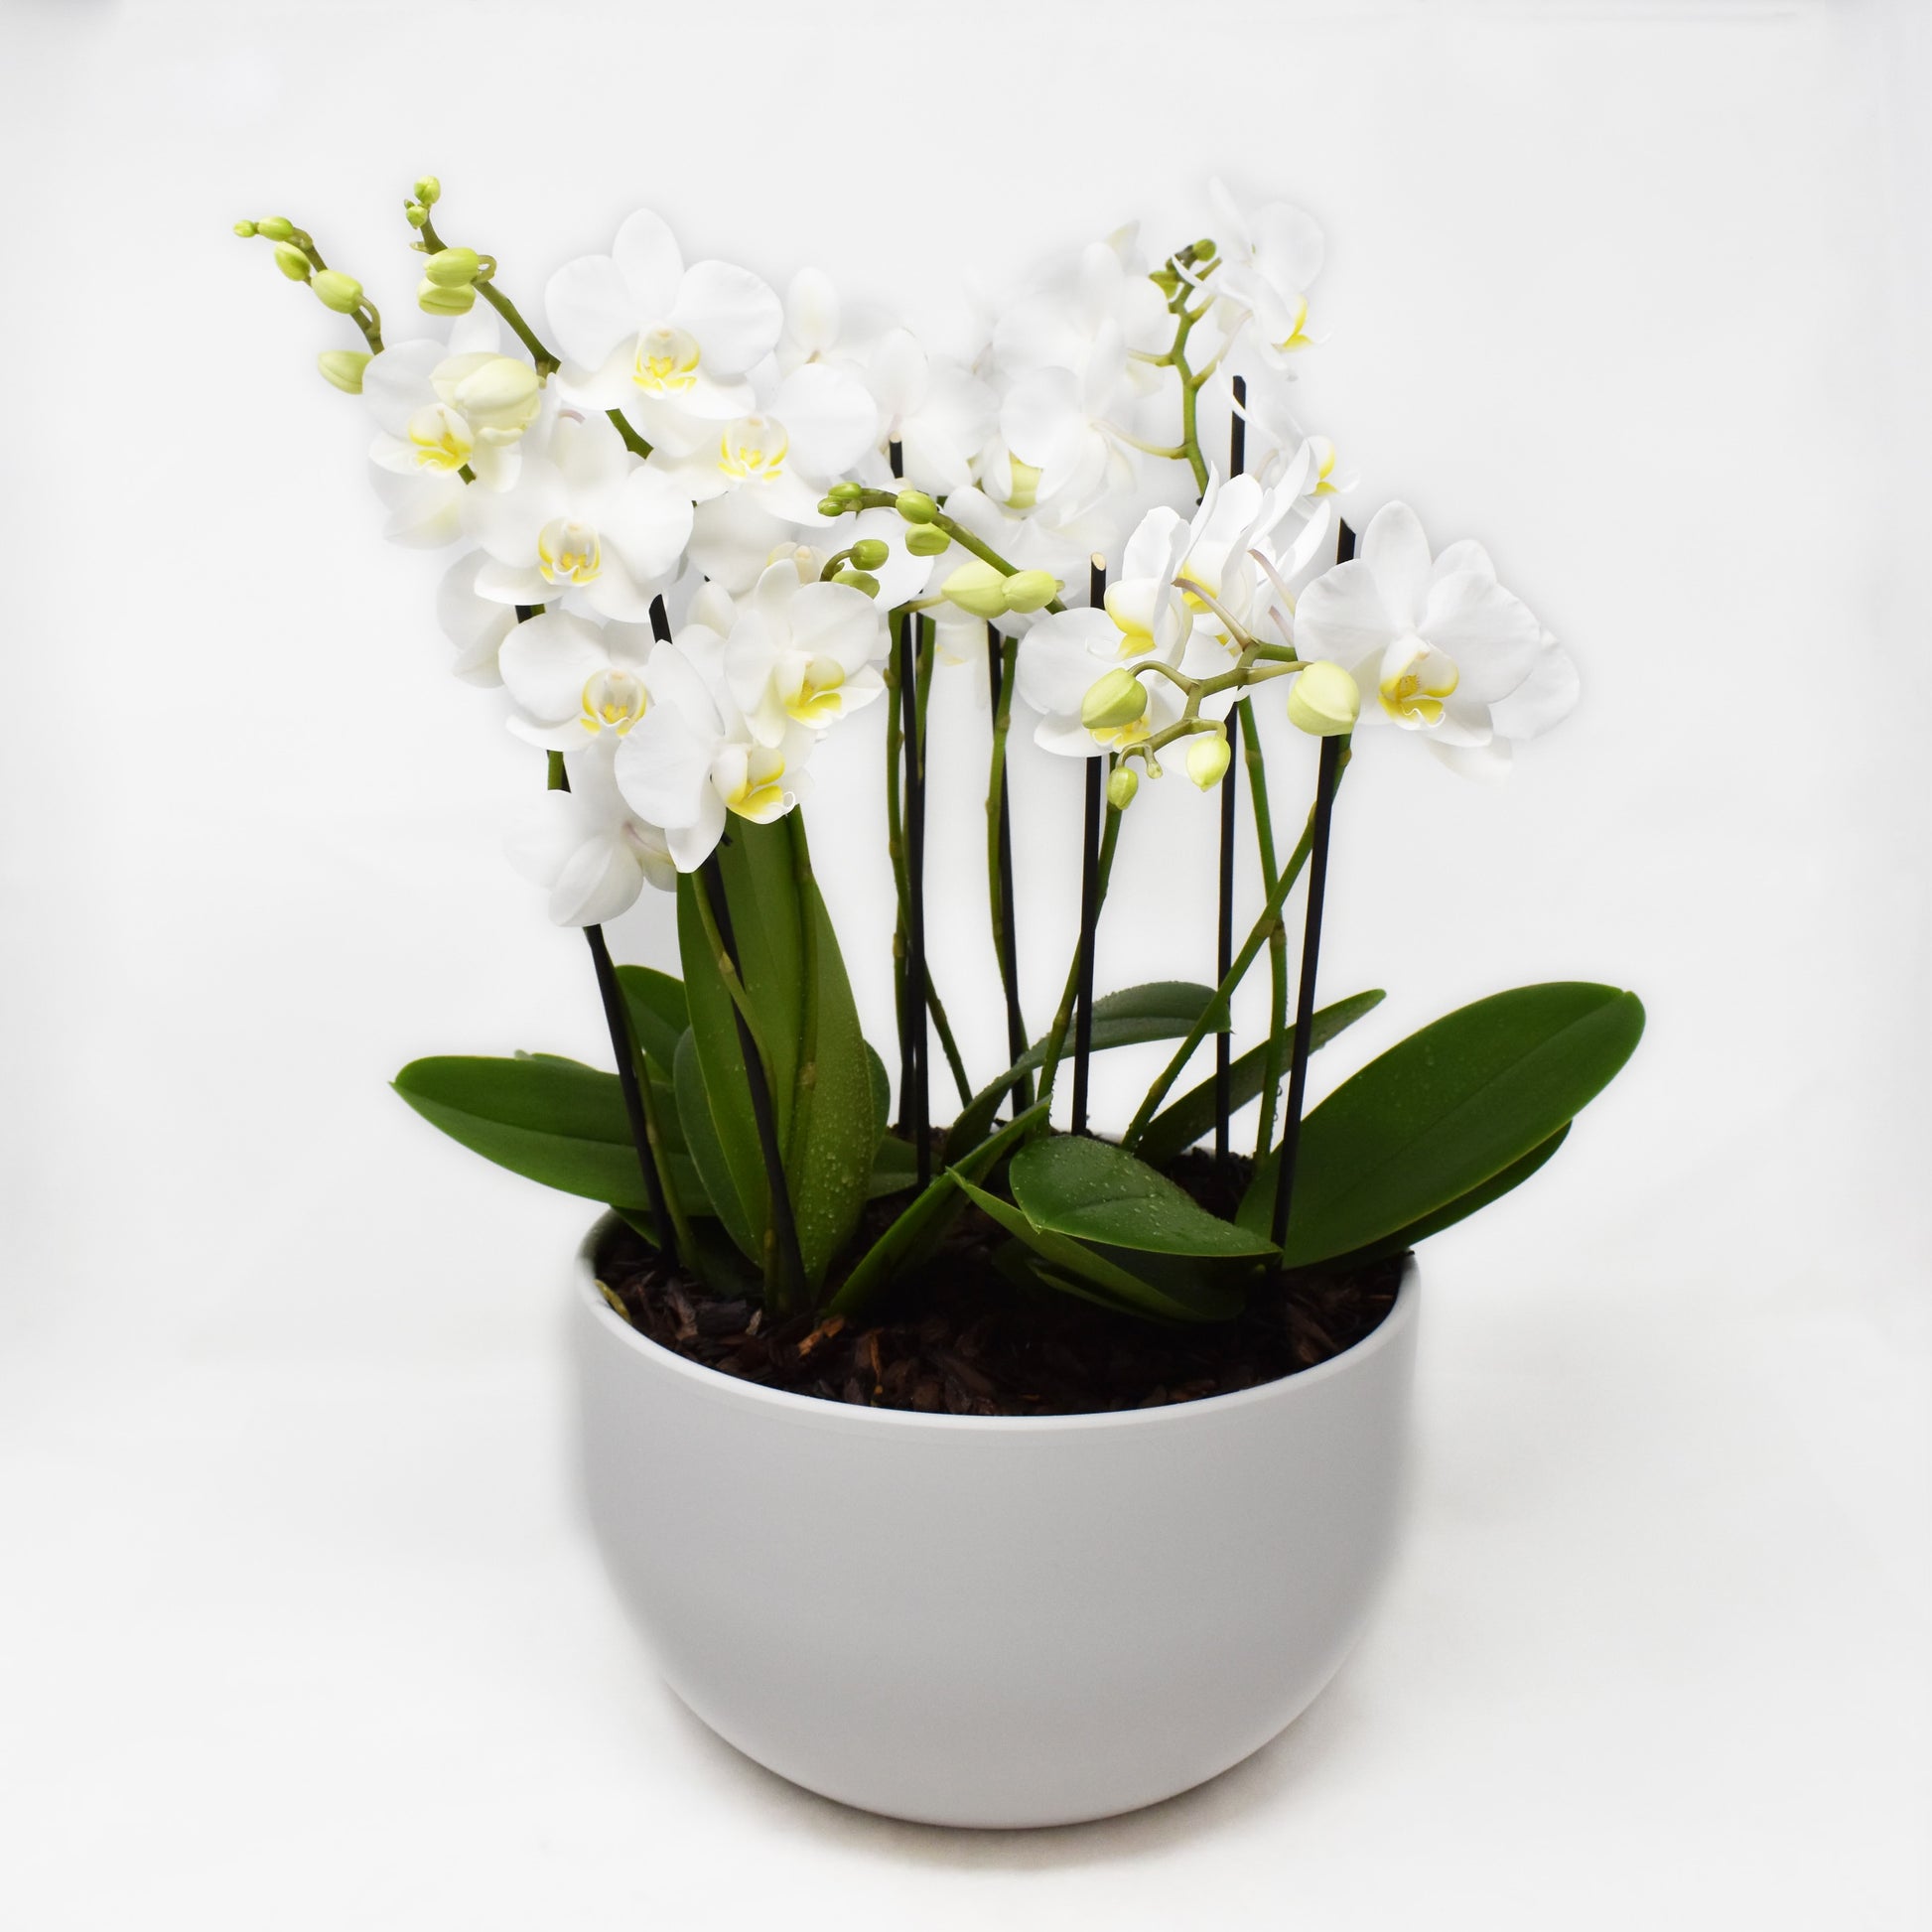 Three medium sized white orchid plants potted in a white ceramic bowl